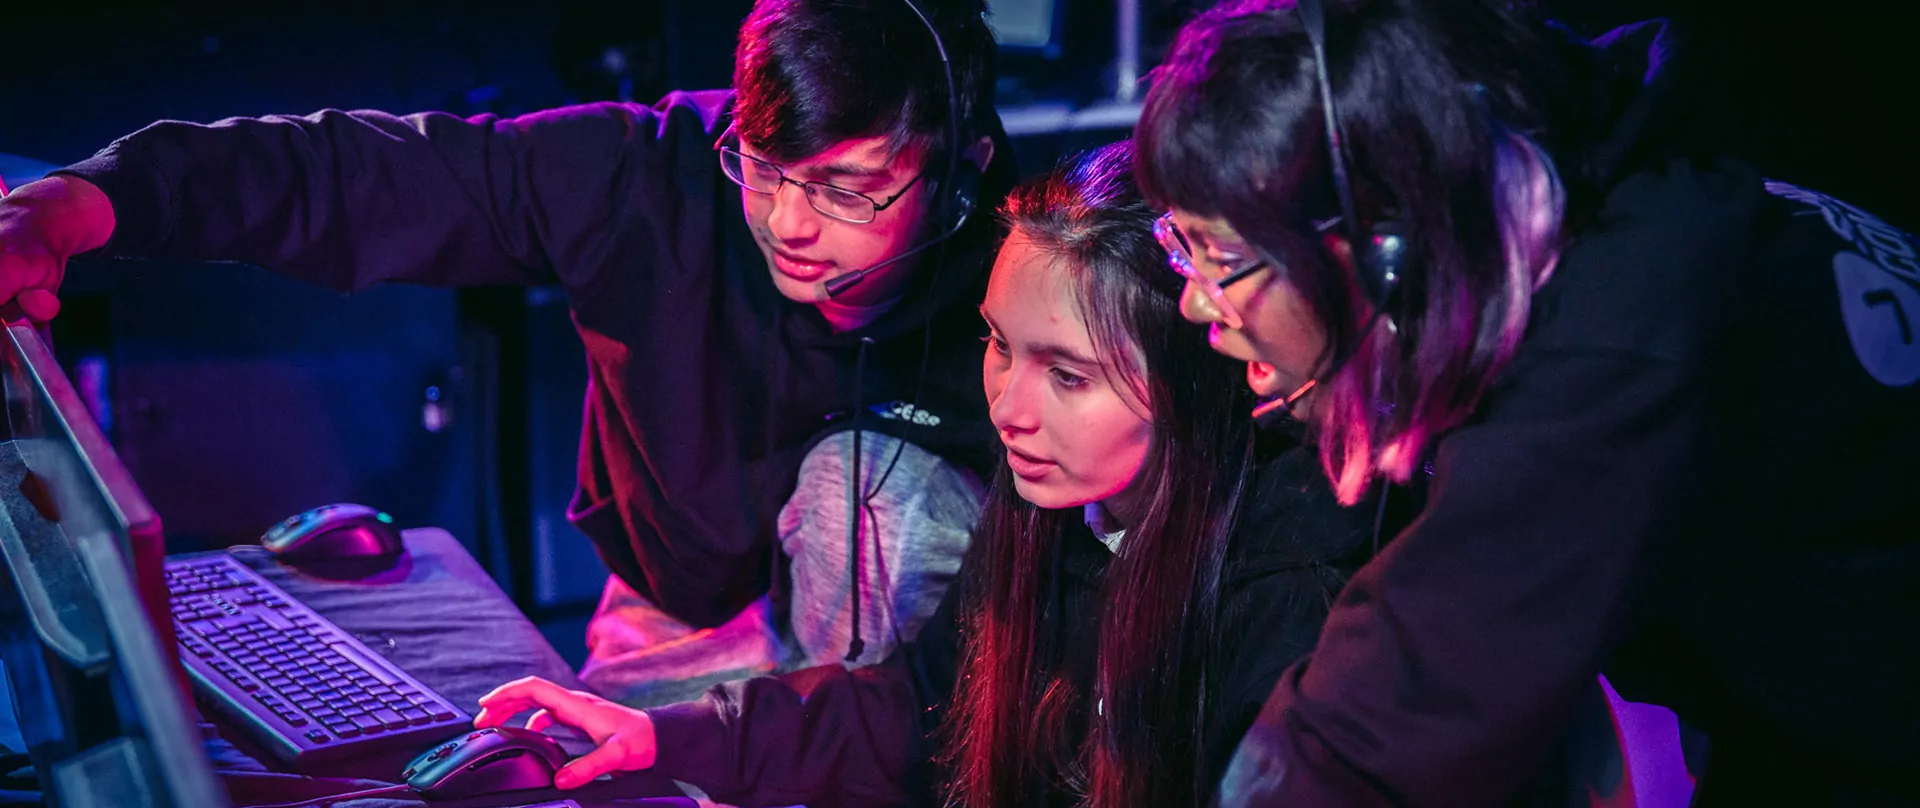 A group of people competing in esports